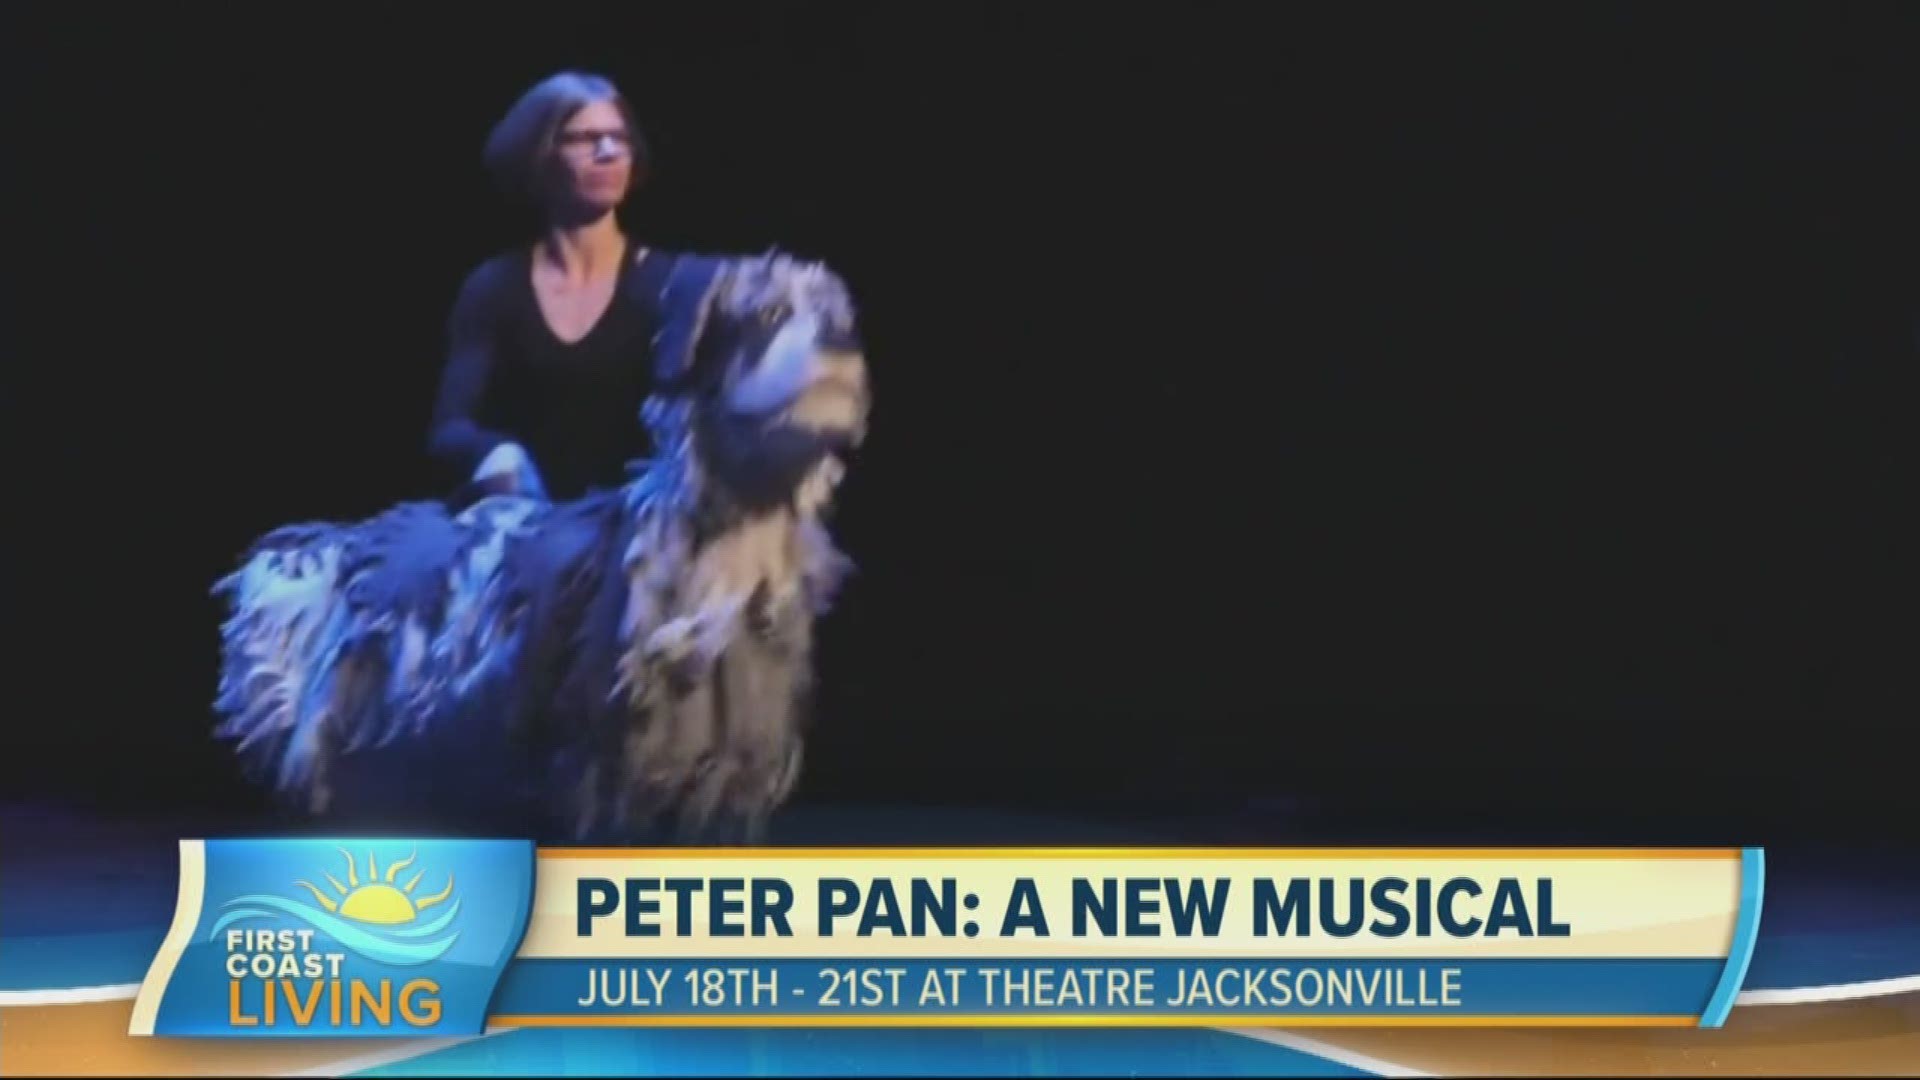 Be sure to catch this fun for the whole family Peter Pan musical at Theatre Jacksonville!